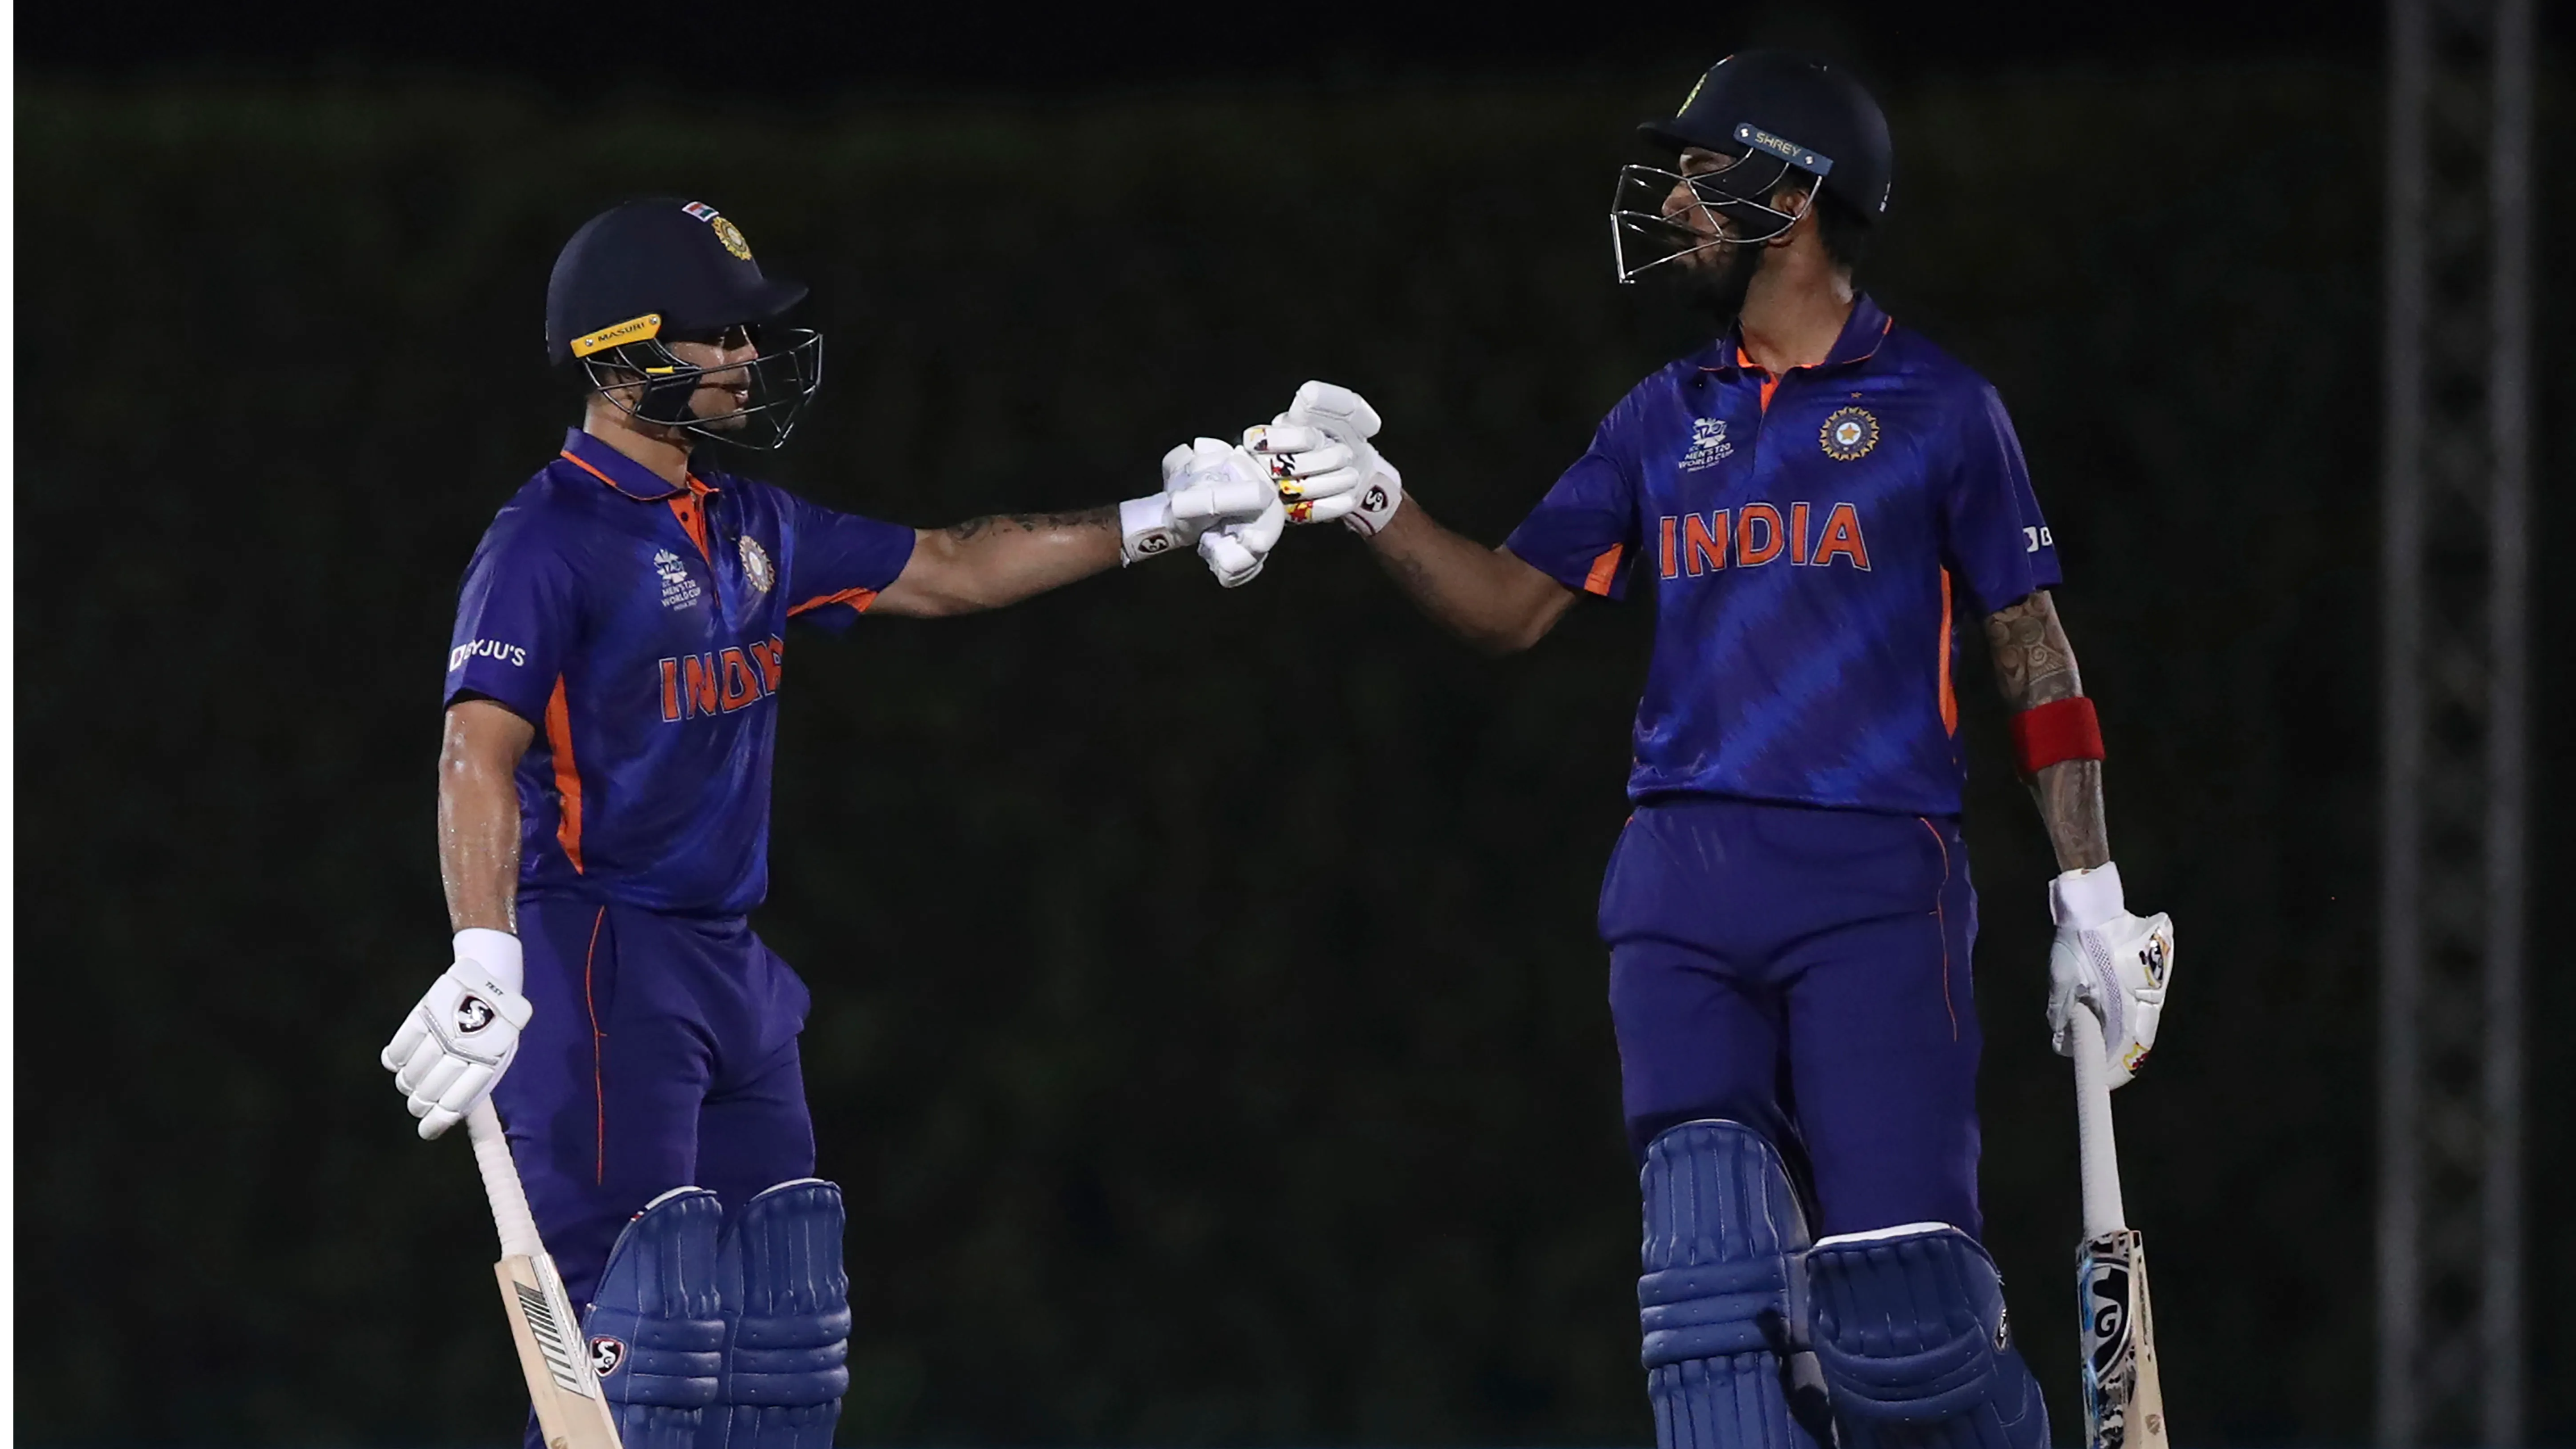 T20 World Cup 2021: Talking points after India’s loss against New Zealand